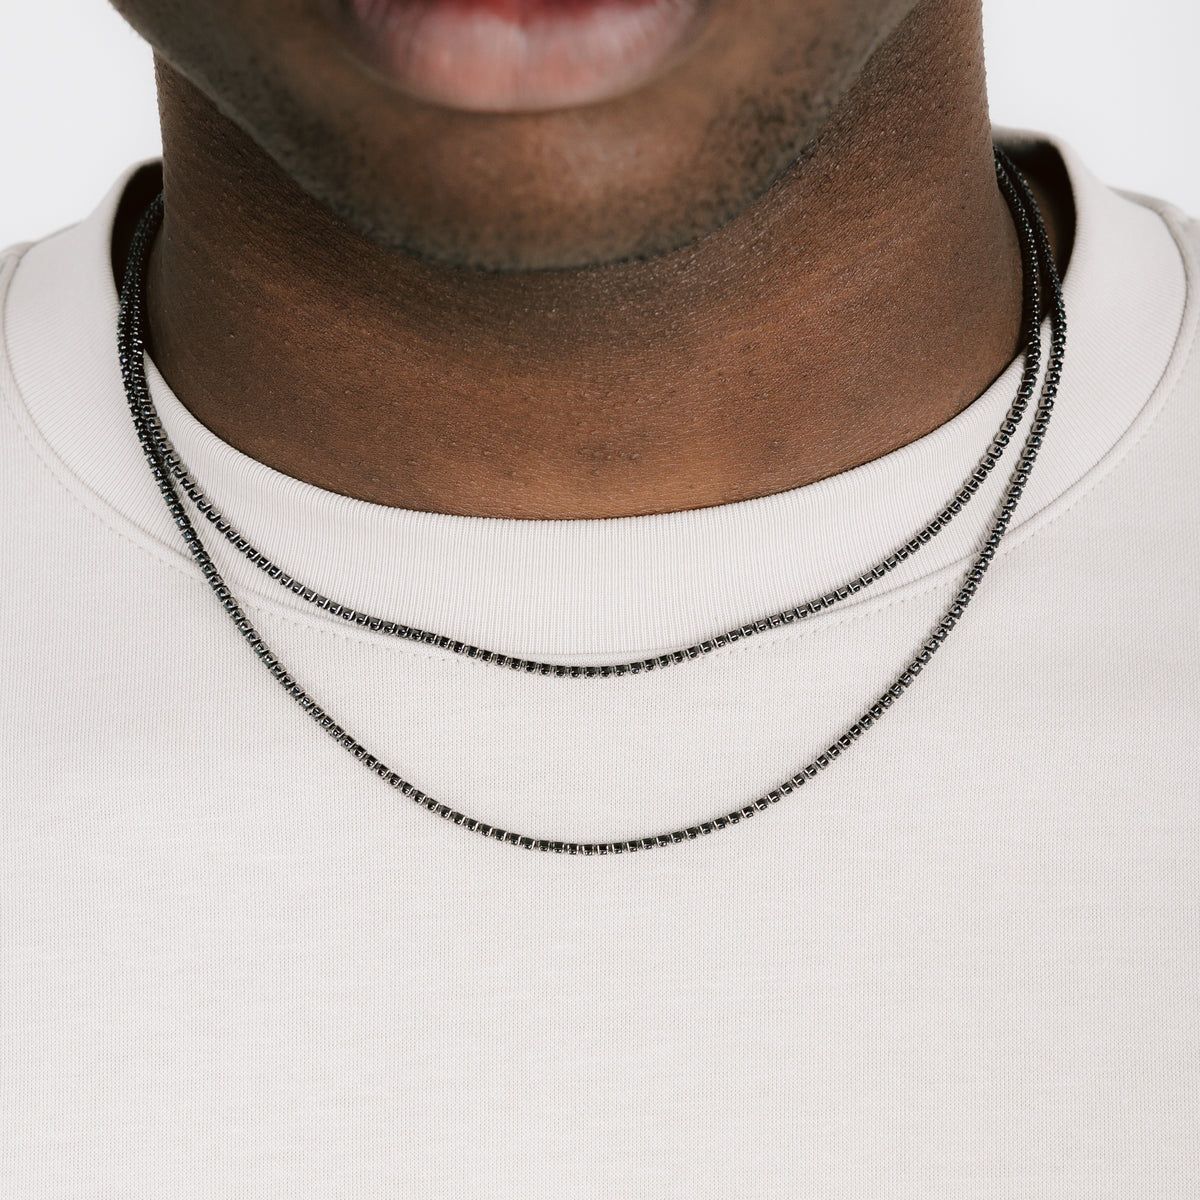 Necklace Chain Only, Chain Necklace Men Black, Box Chain Necklace, 2mm  Black Chain Necklace 18 Inches